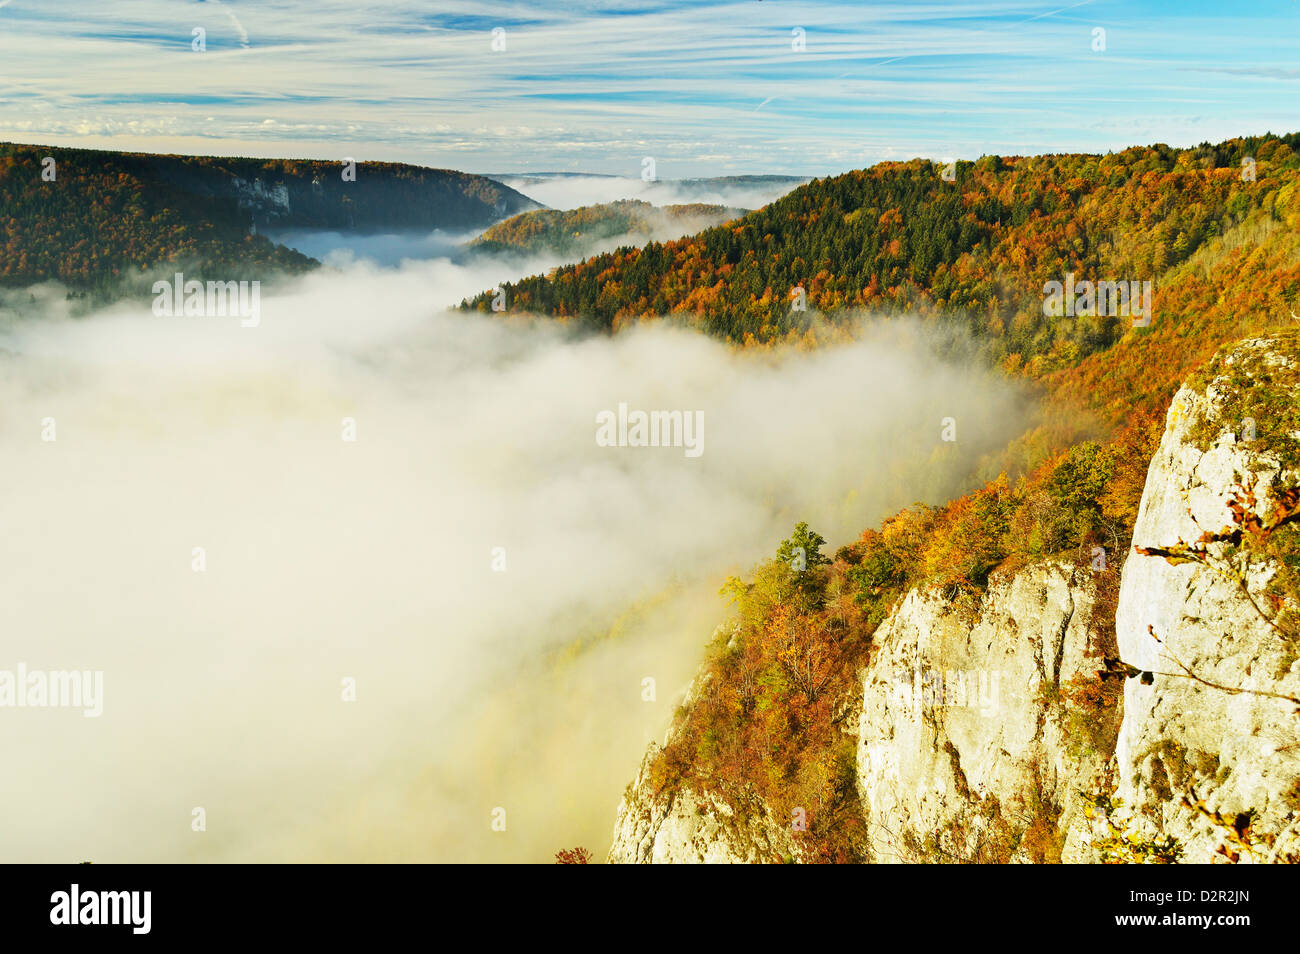 View from Eichfelsen of the Donautal (Danube Valley), near Beuron, Baden-Wurttemberg, Germany, Europe Stock Photo